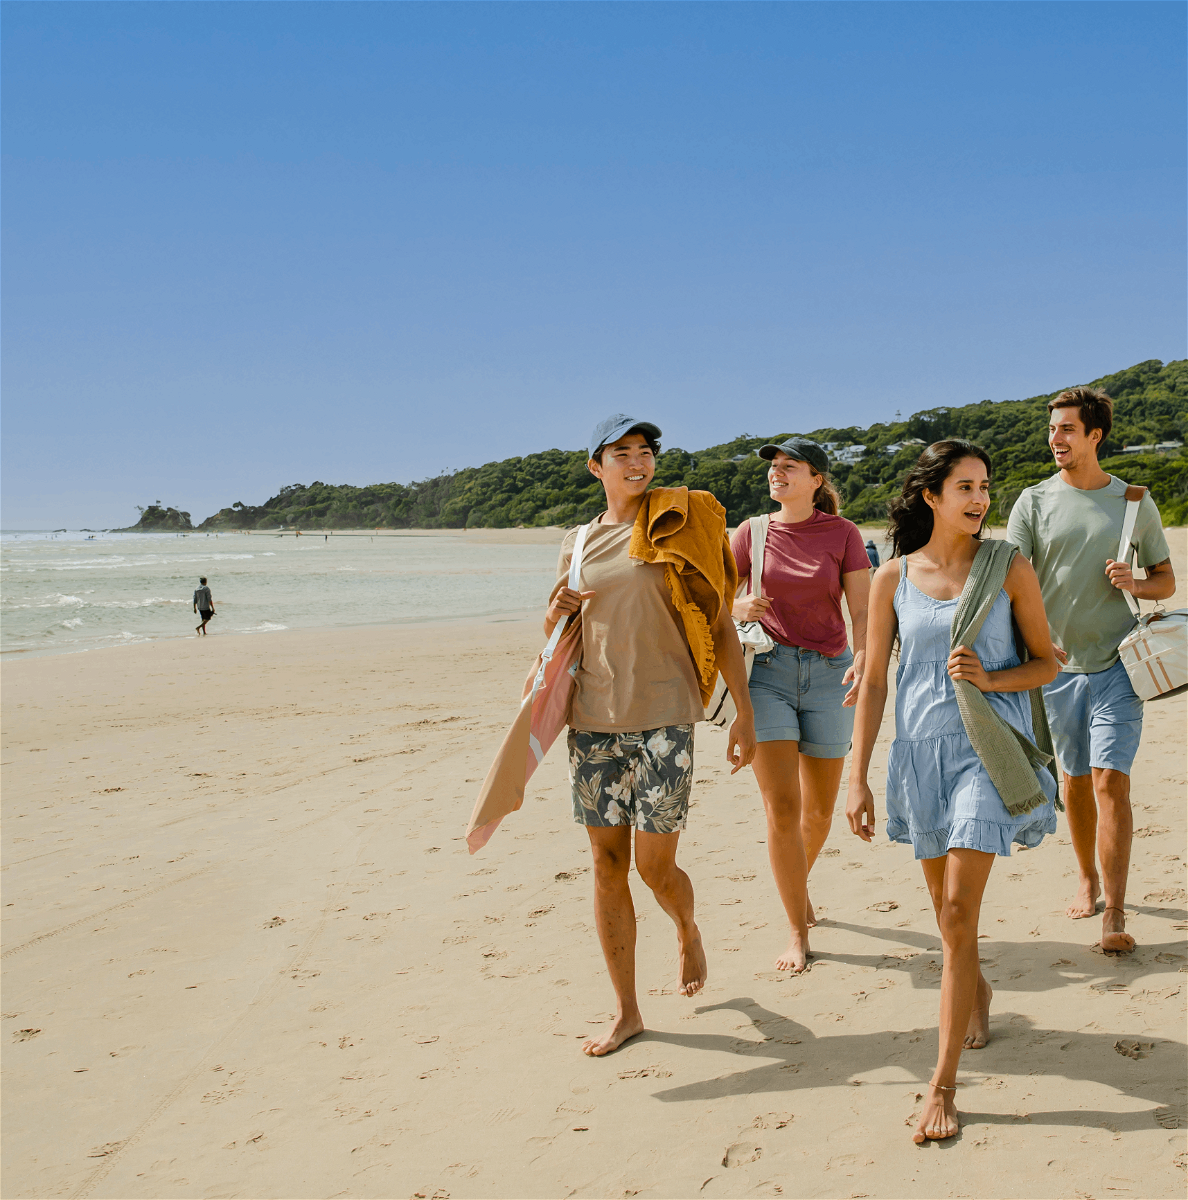 Group of travellers on a beach in New South Wales, Australia